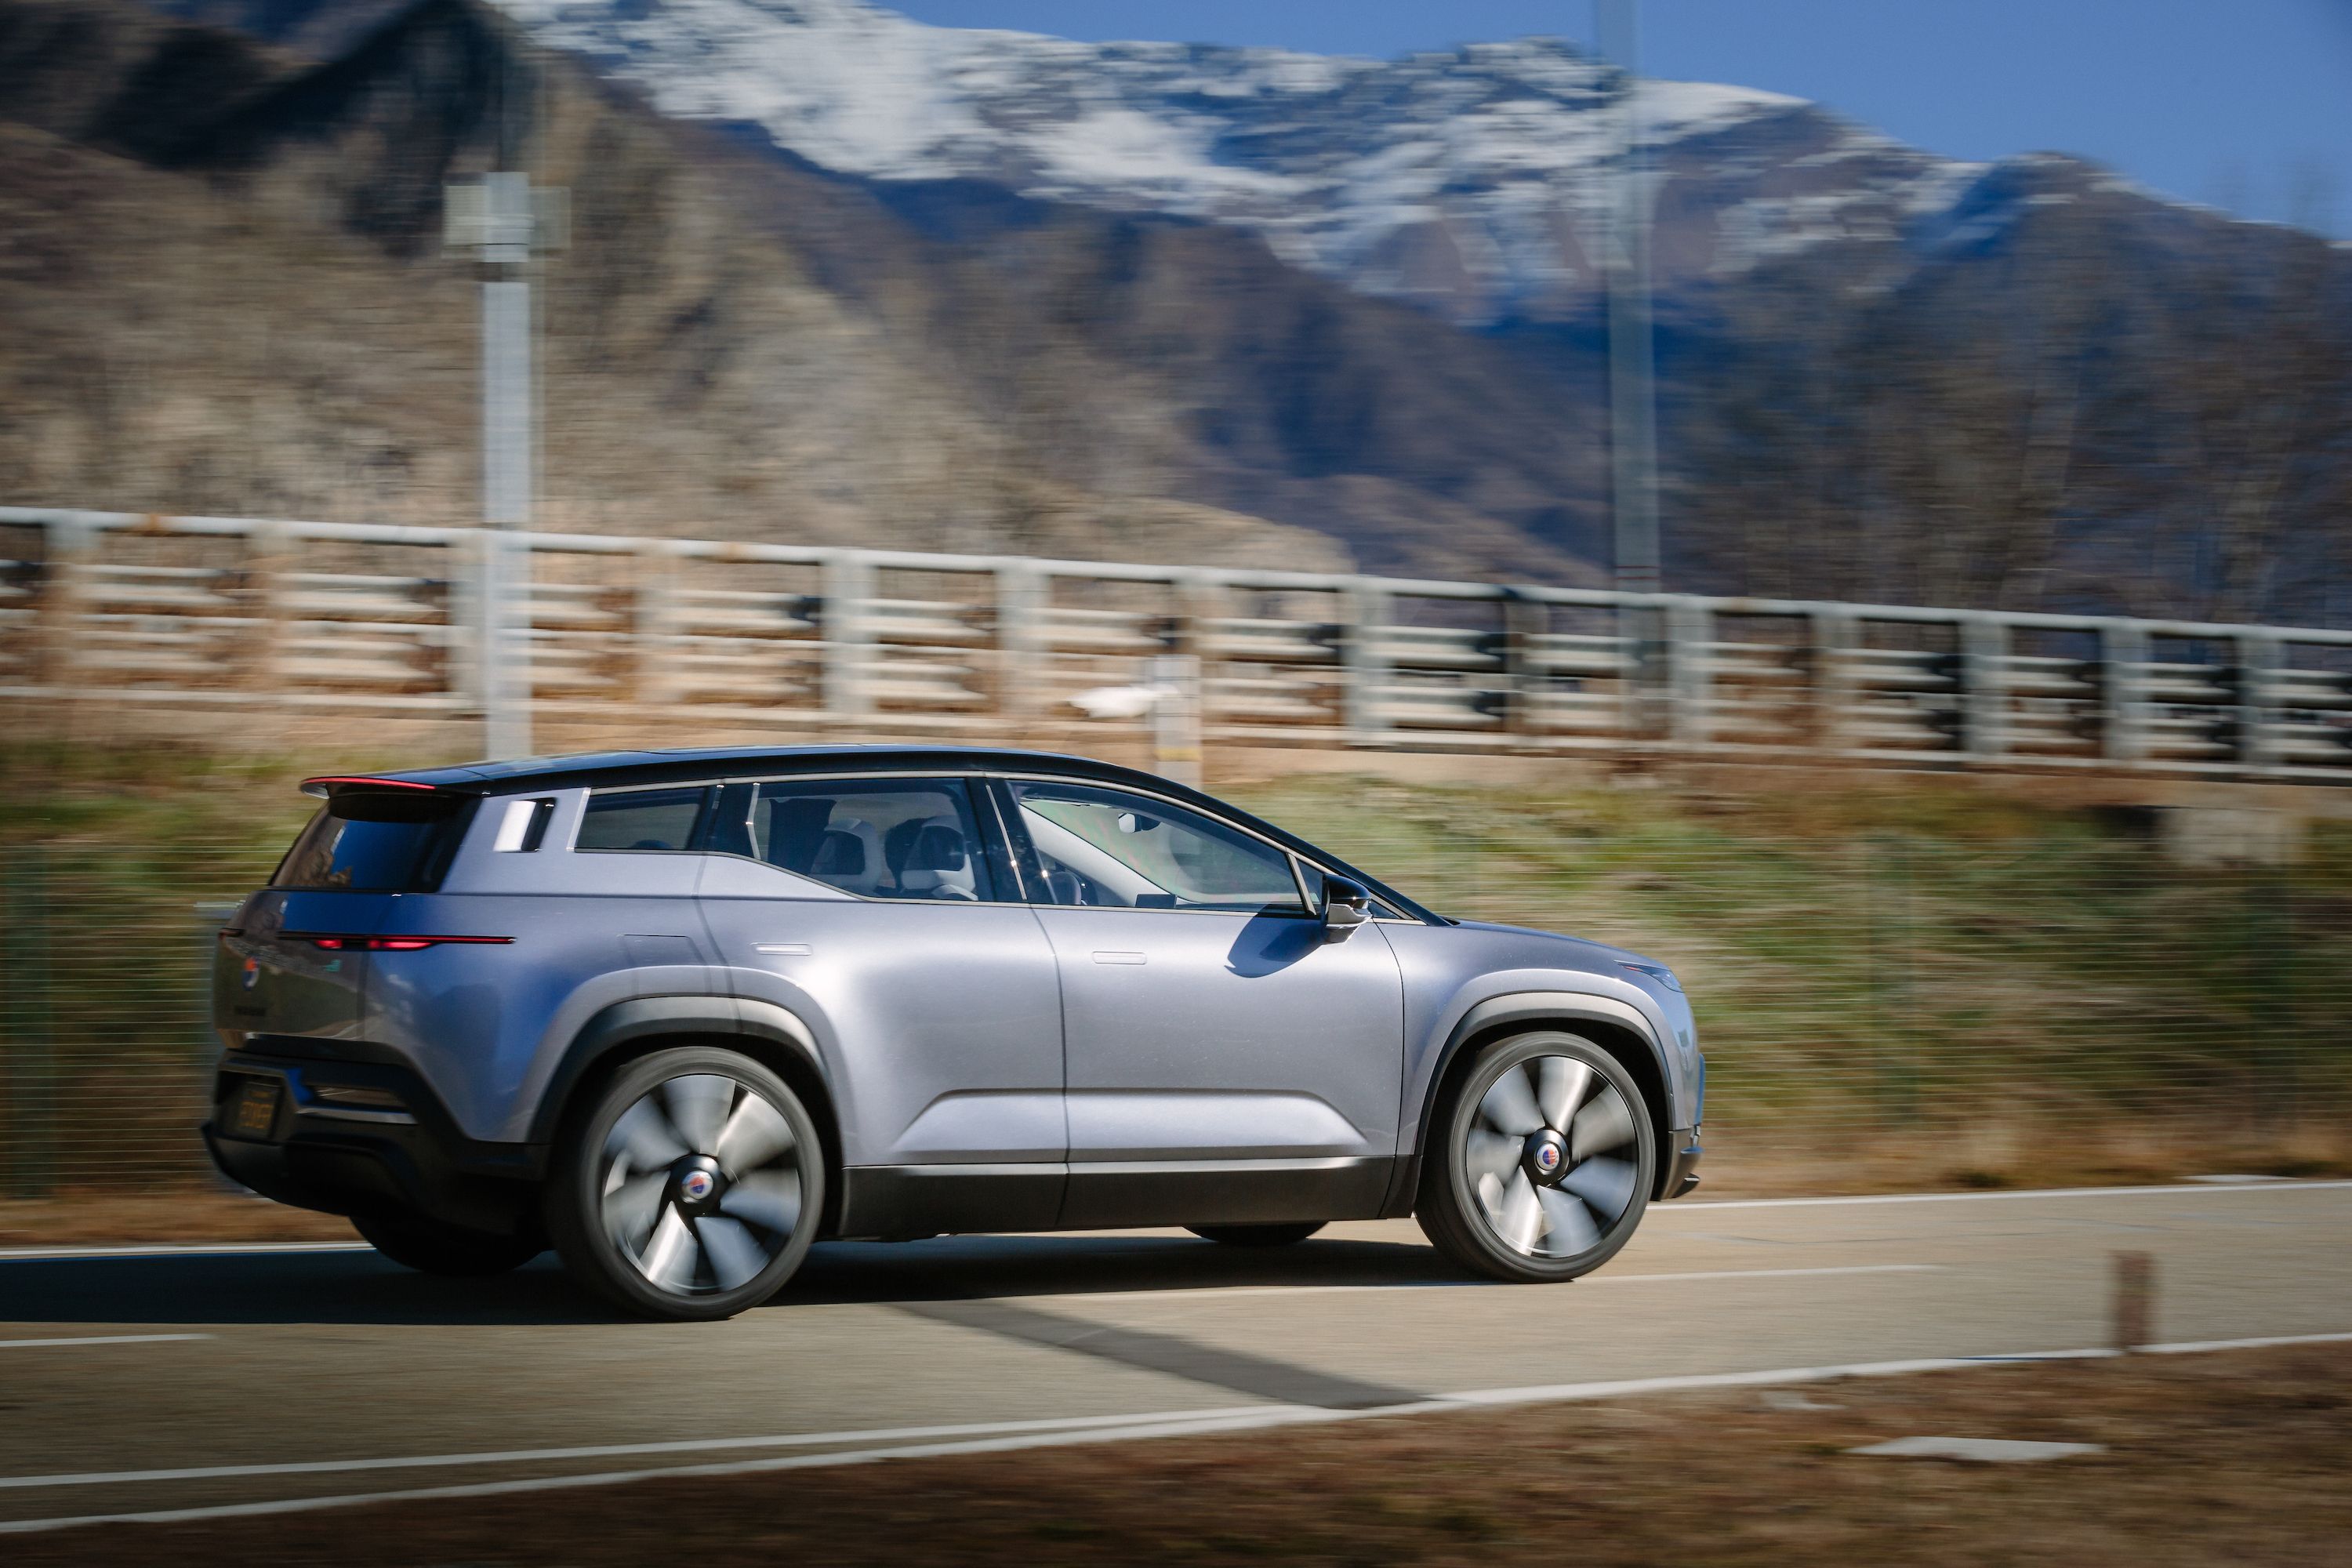 Ocean Electric SUV on the highway